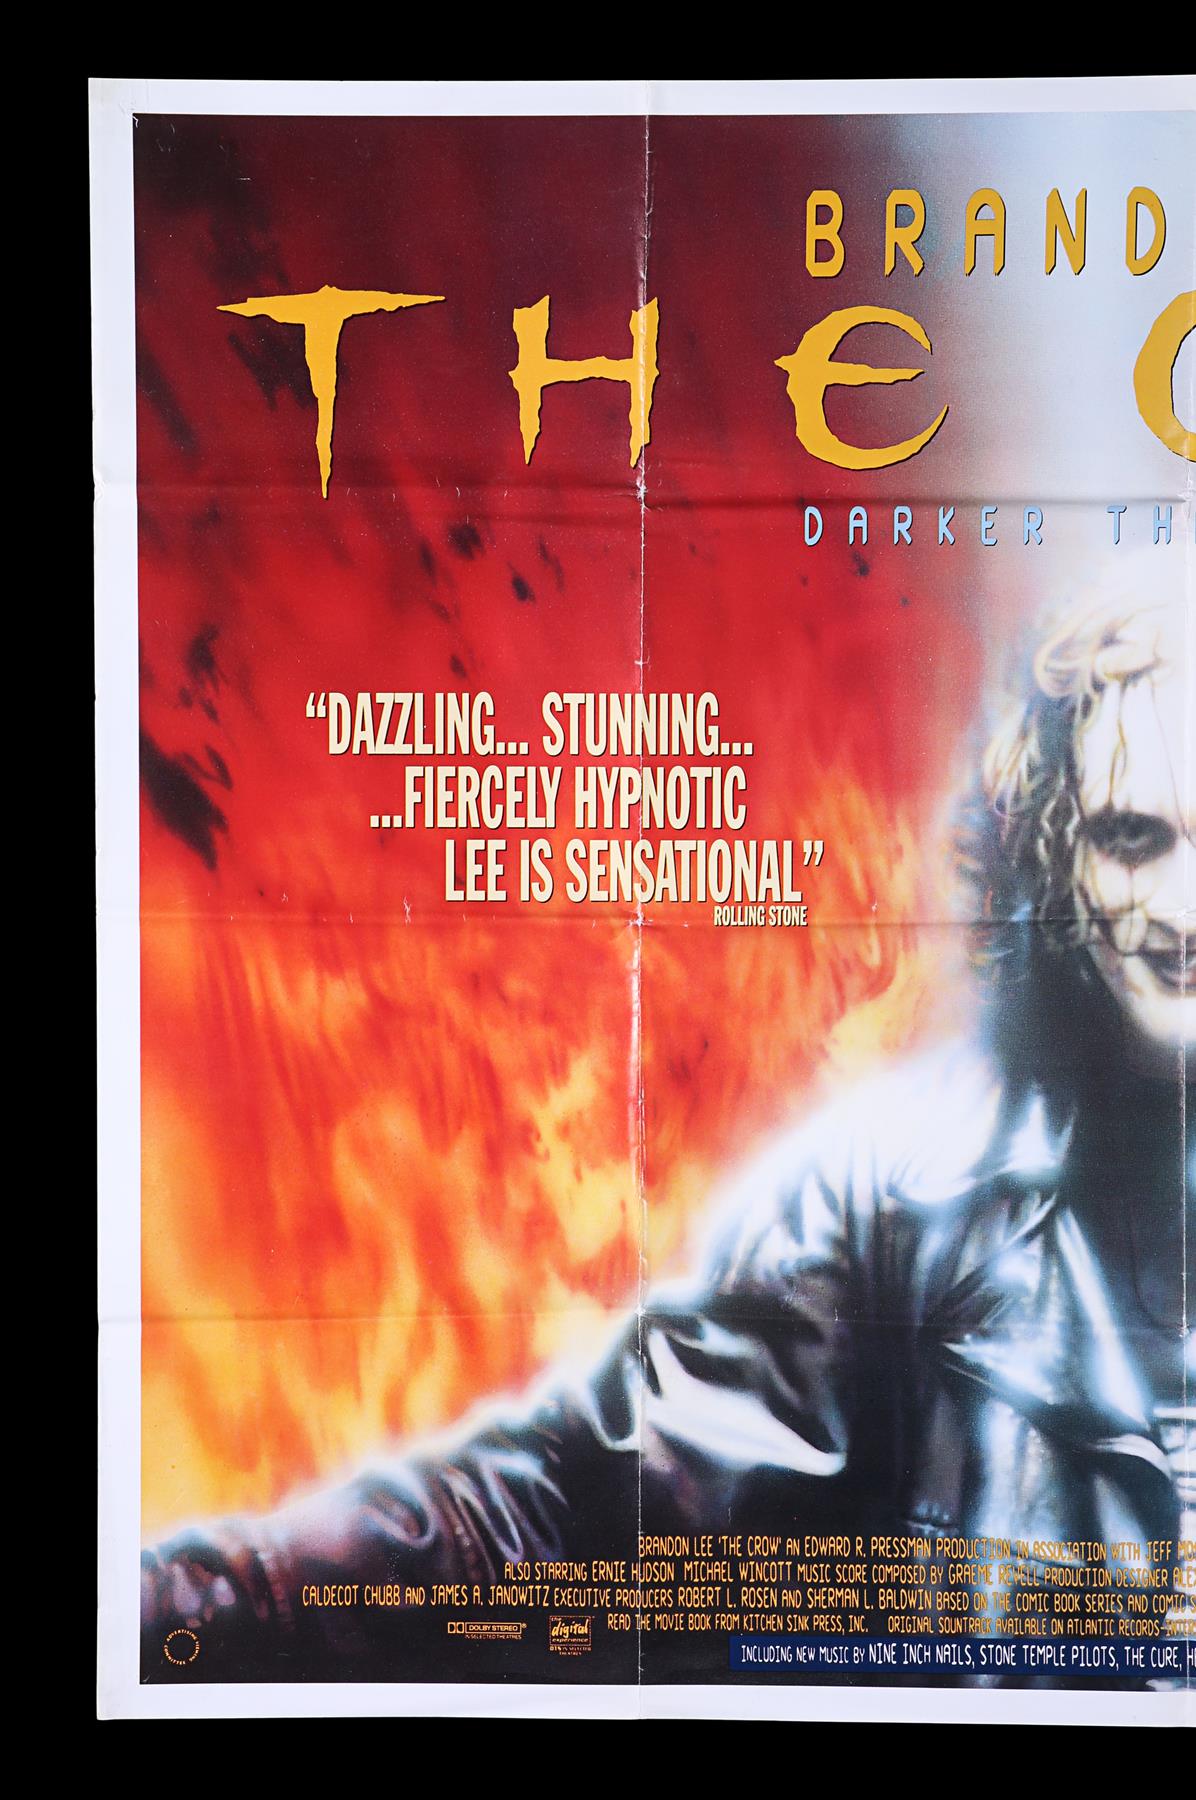 THE CROW (1994) - US One-Sheet and UK Quad, 1994 - Image 6 of 7